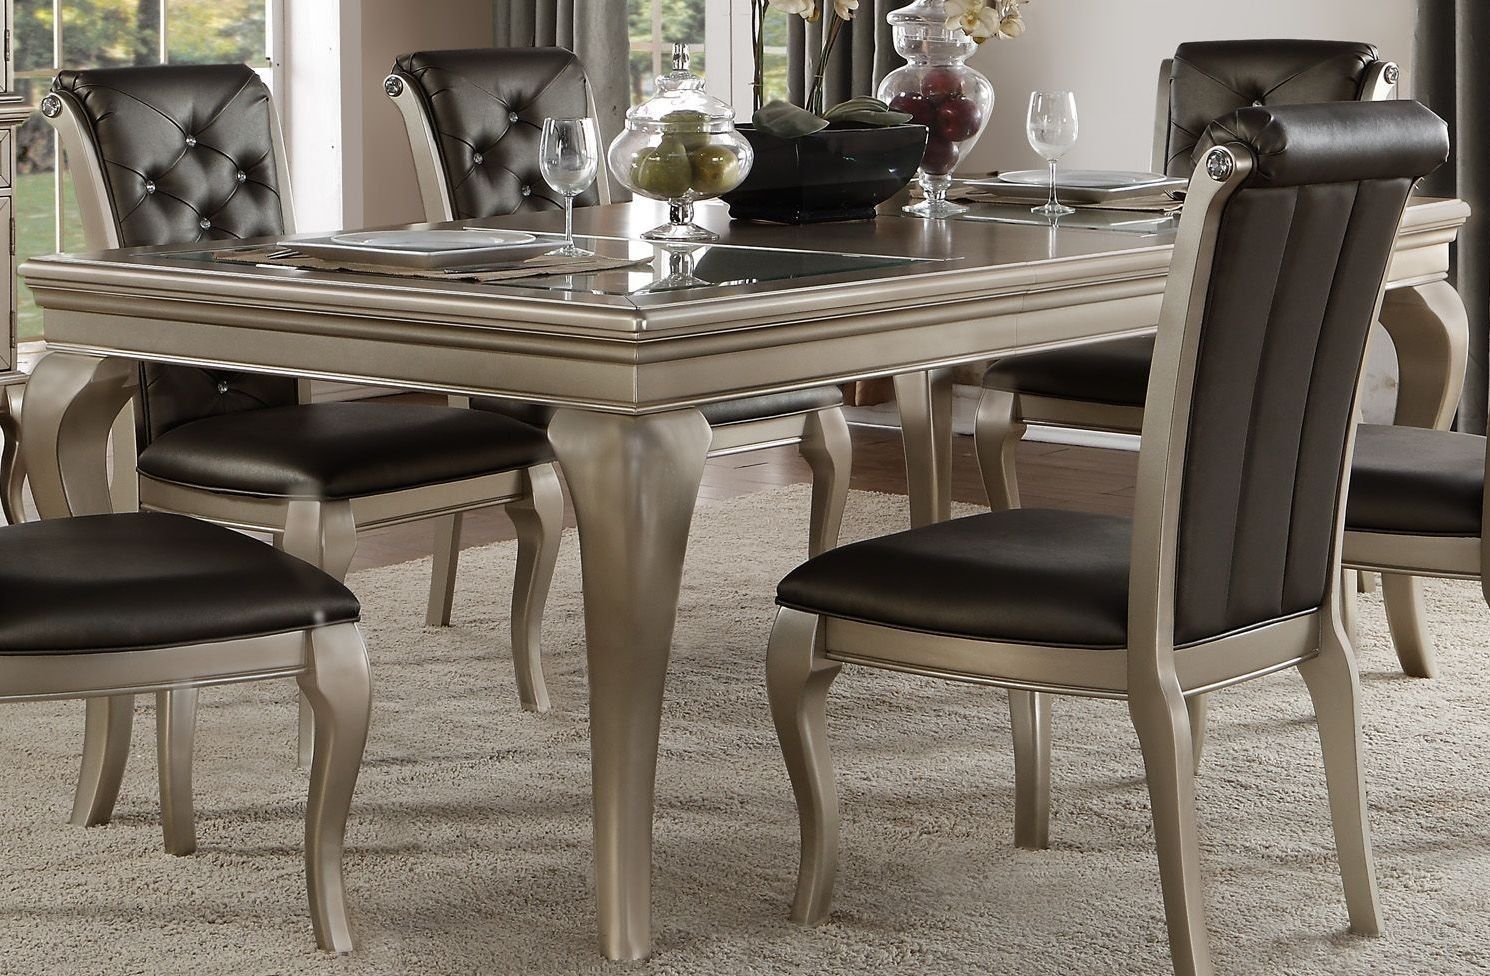 Homelegance Crawford Silver Extendable Dining Room Set – Crawford For Most Current Crawford 6 Piece Rectangle Dining Sets (View 2 of 20)